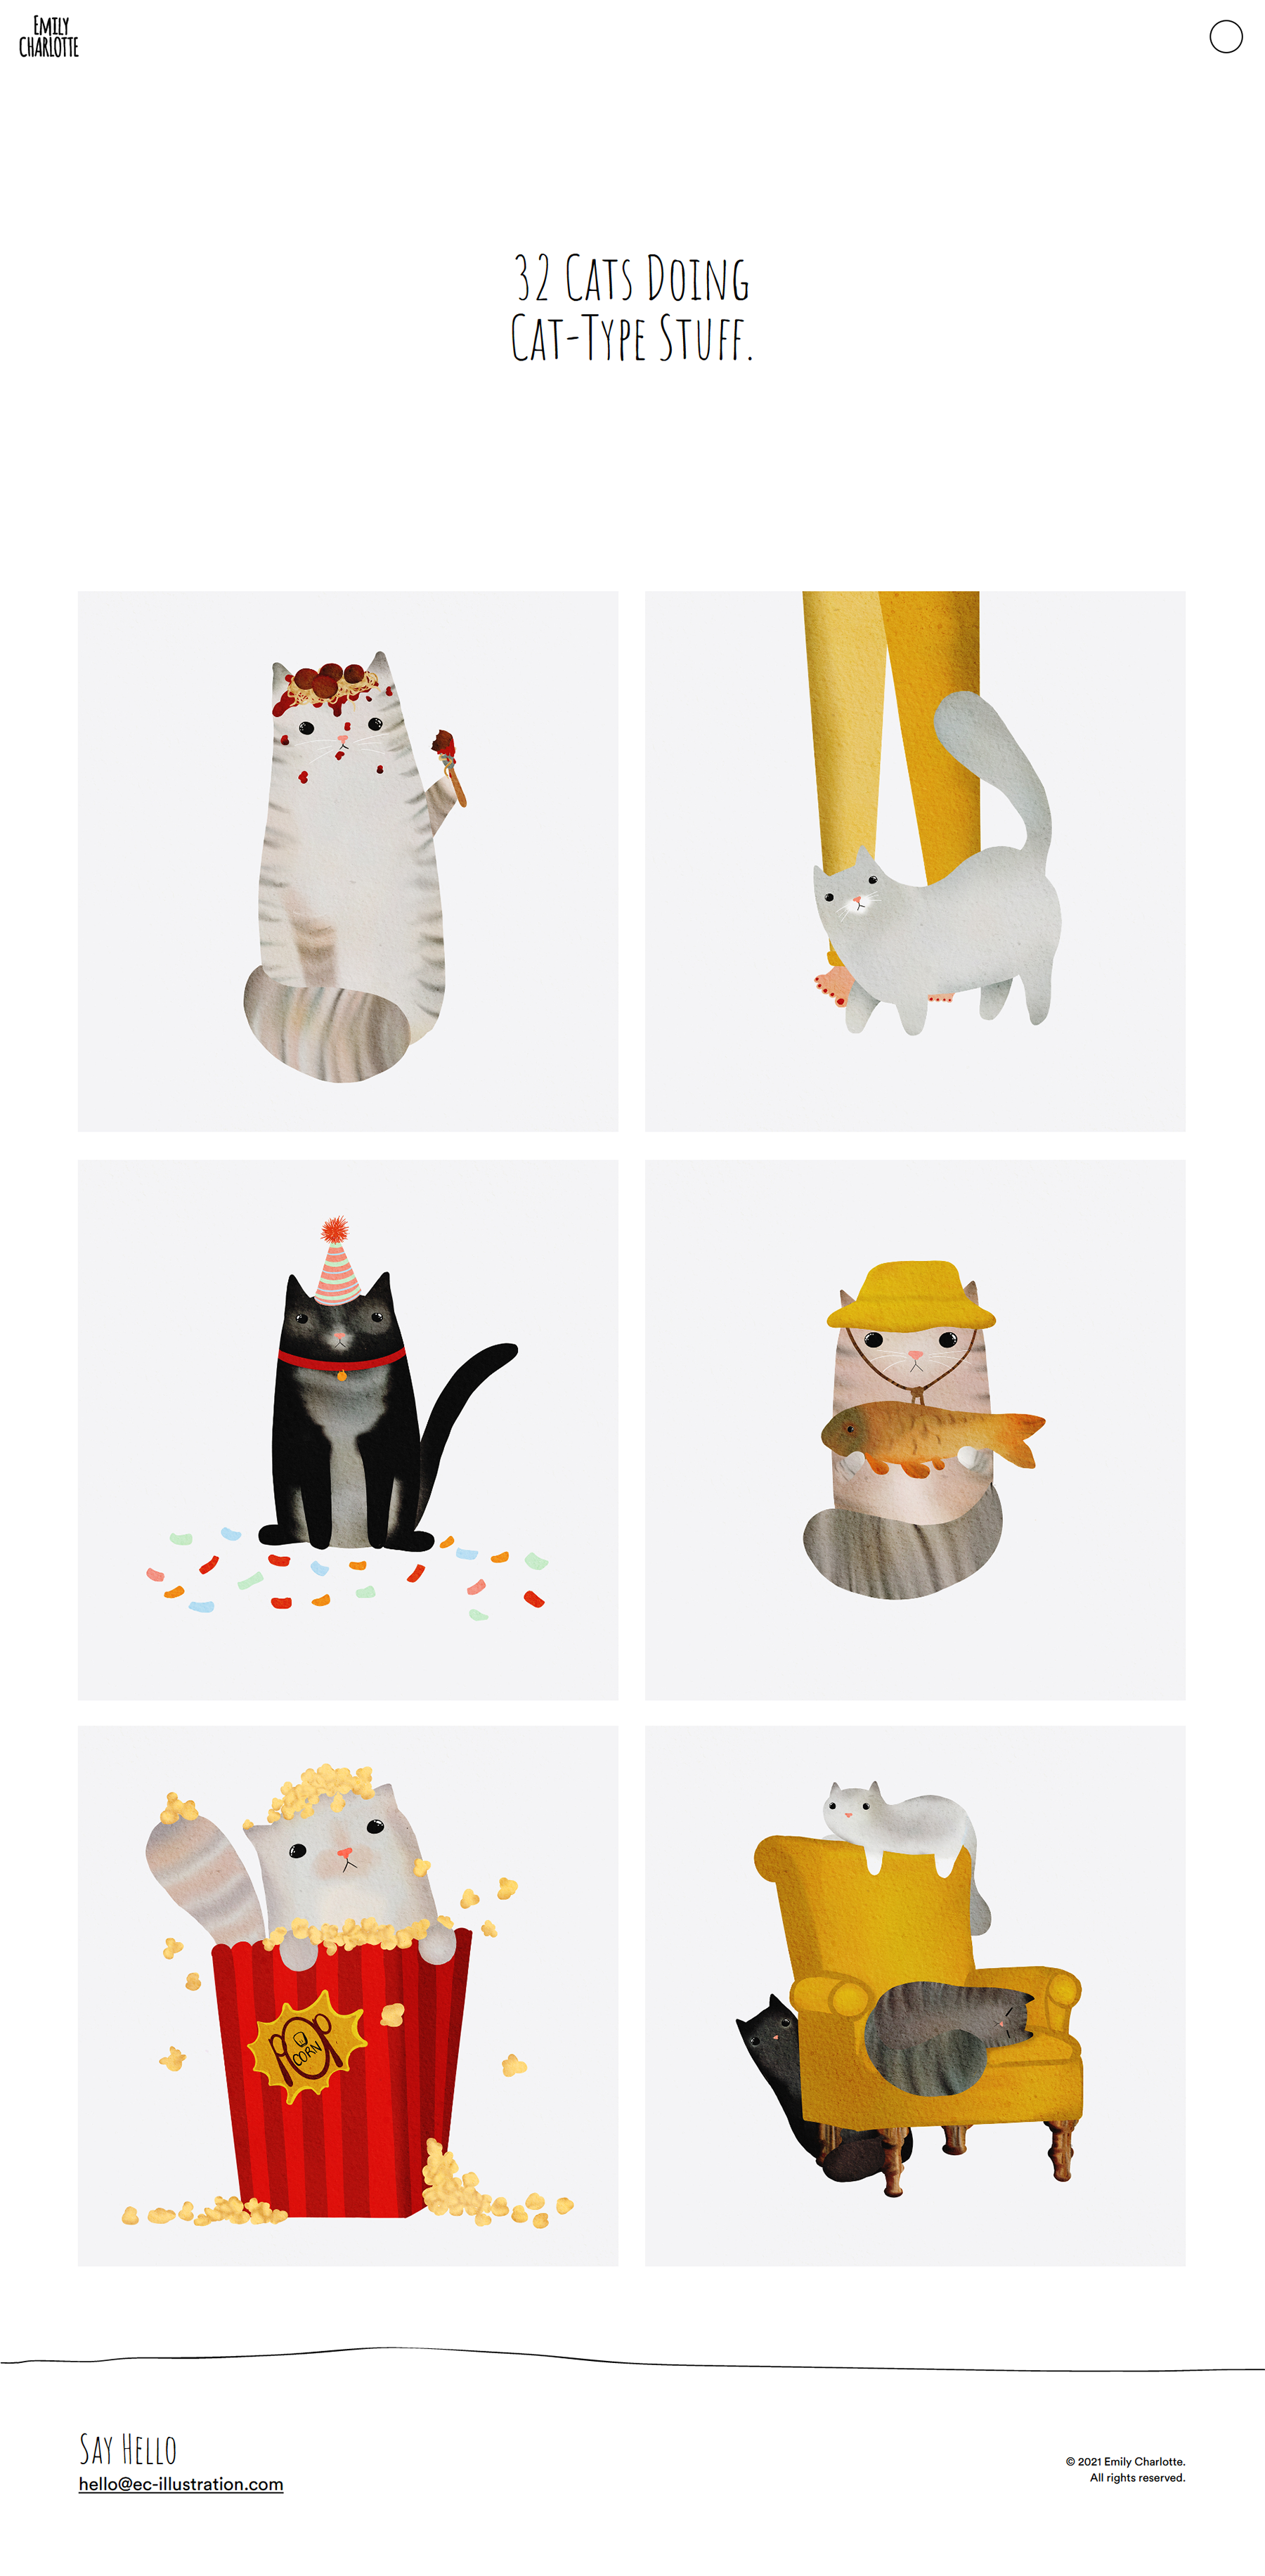 Cat illustrations by Emily Charlotte.